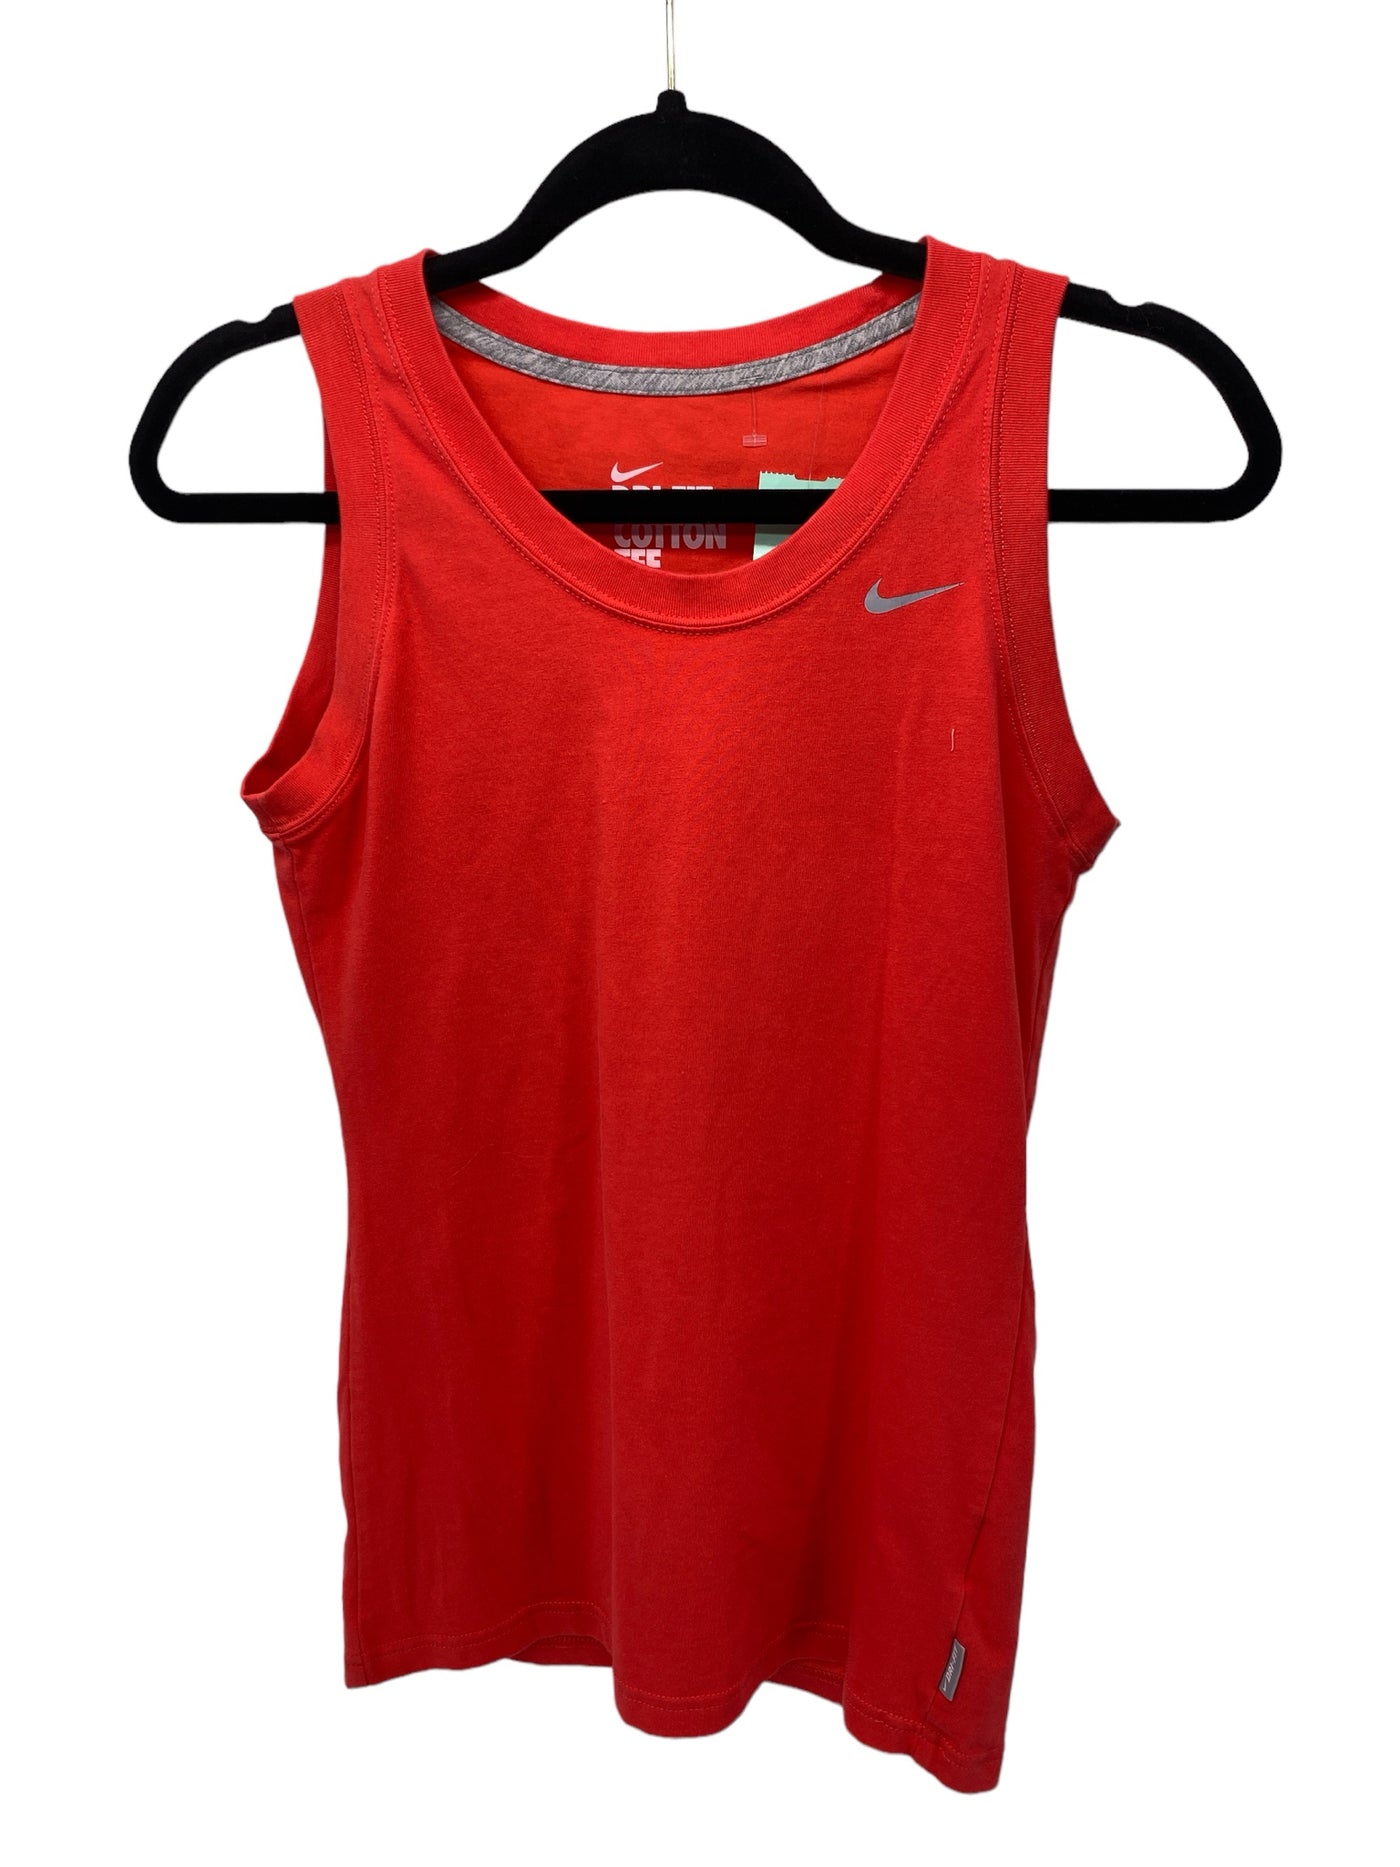 Nike Misses Size Small Red Athleisure Tank